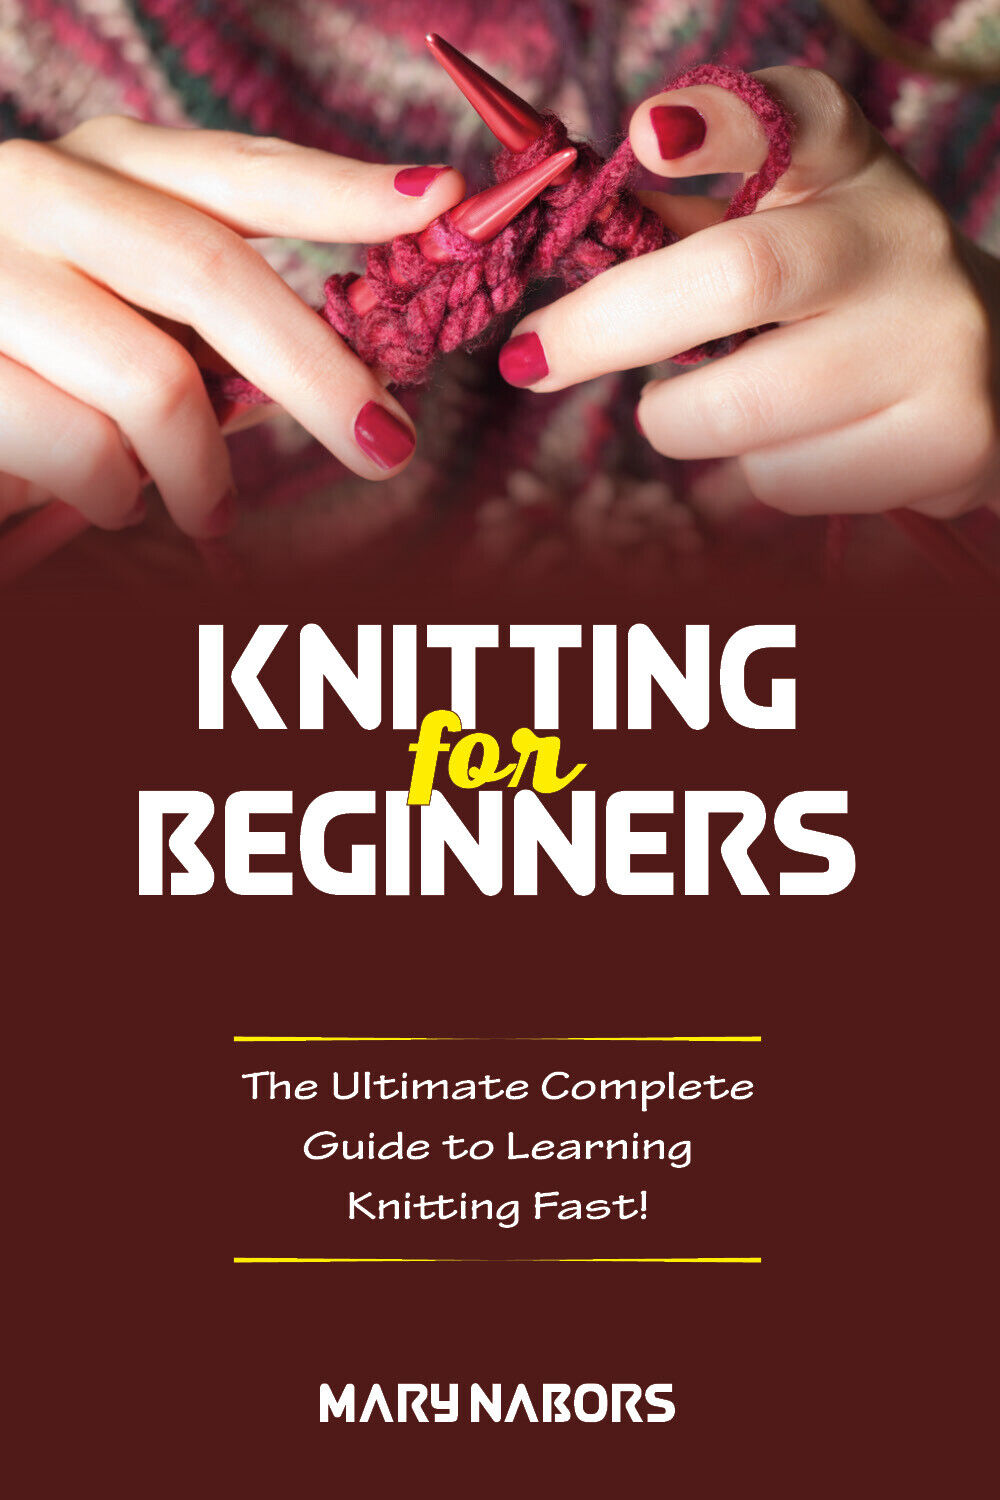 Knitting for beginners. The Ultimate Complete Guide To Learning Knitting Fast! d libro usato